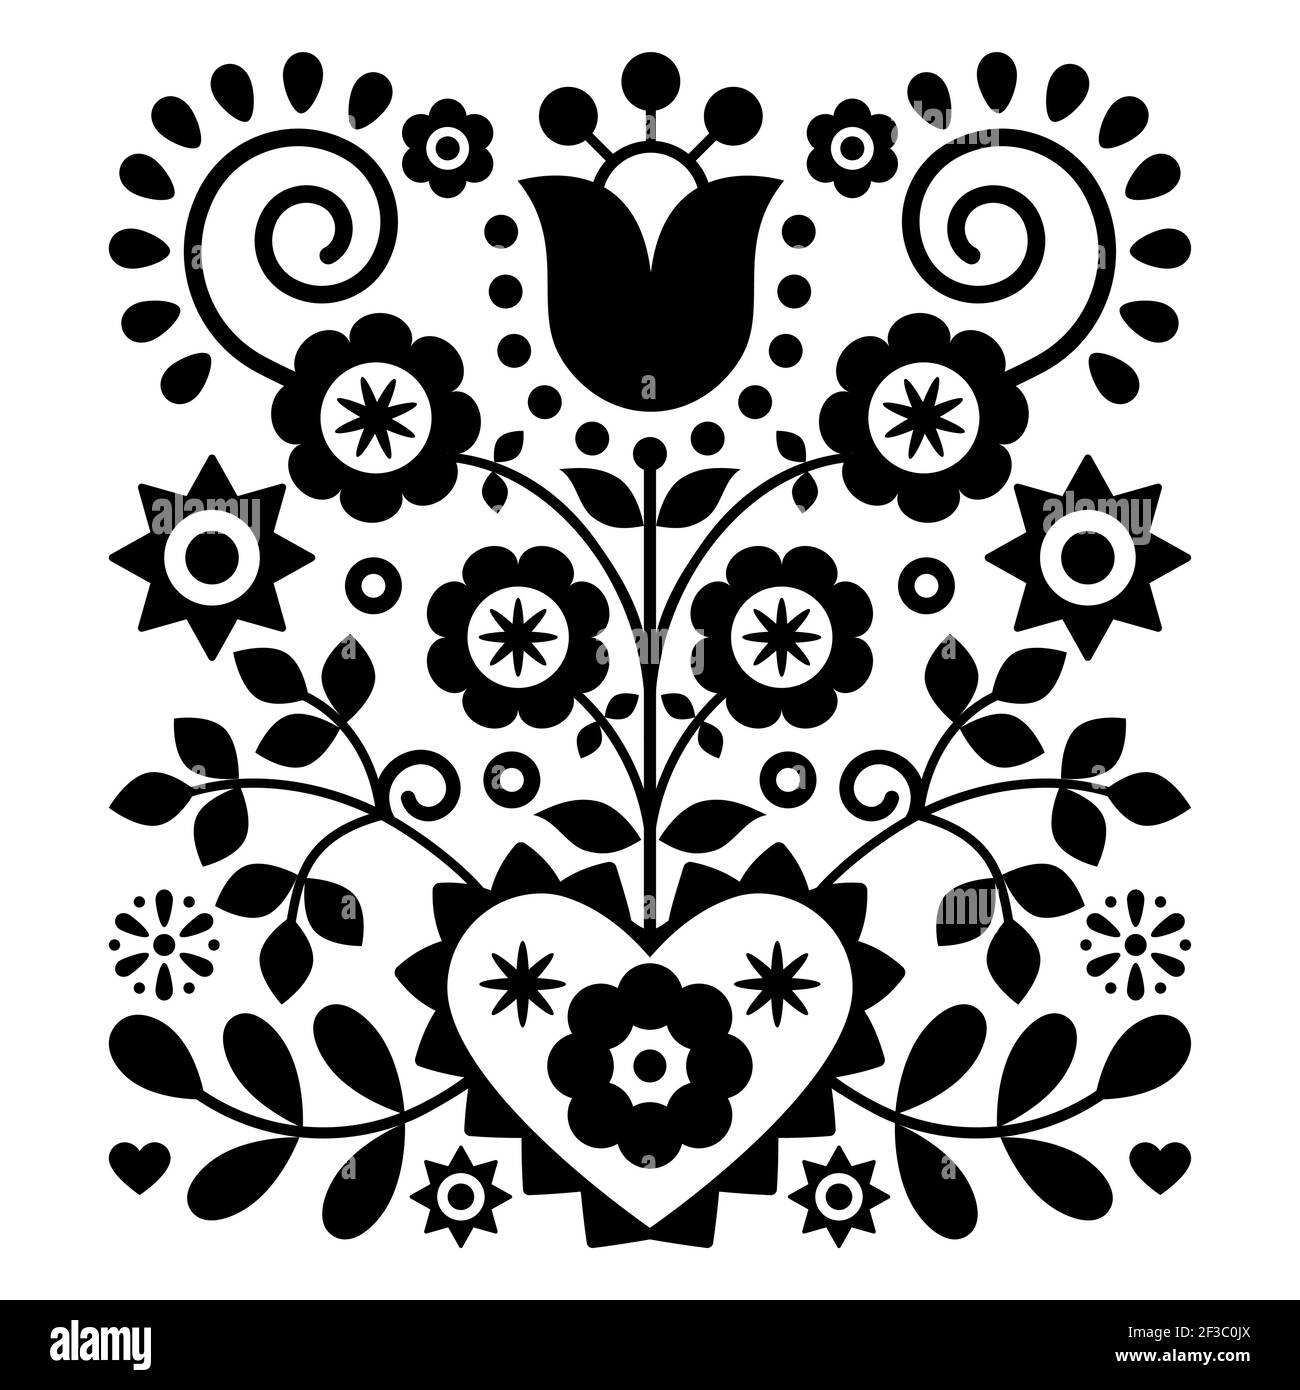 Floral folk art vector design from Nowy Sacz in Poland inspired by traditional highlanders embroidery Lachy Sadeckie in black and white Stock Vector